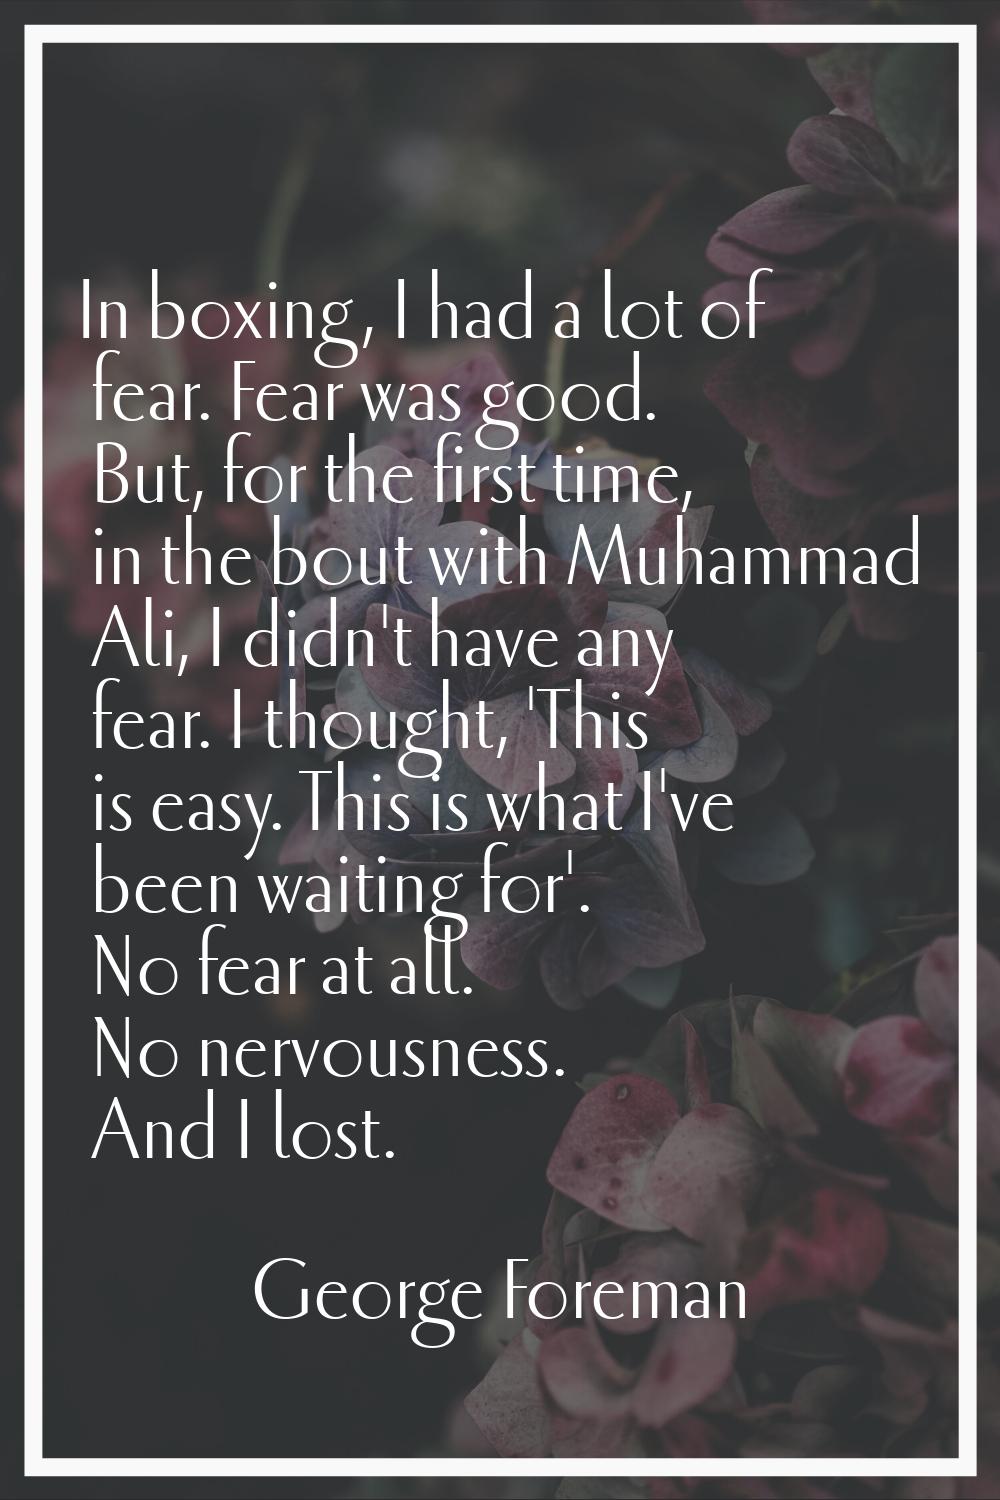 In boxing, I had a lot of fear. Fear was good. But, for the first time, in the bout with Muhammad A